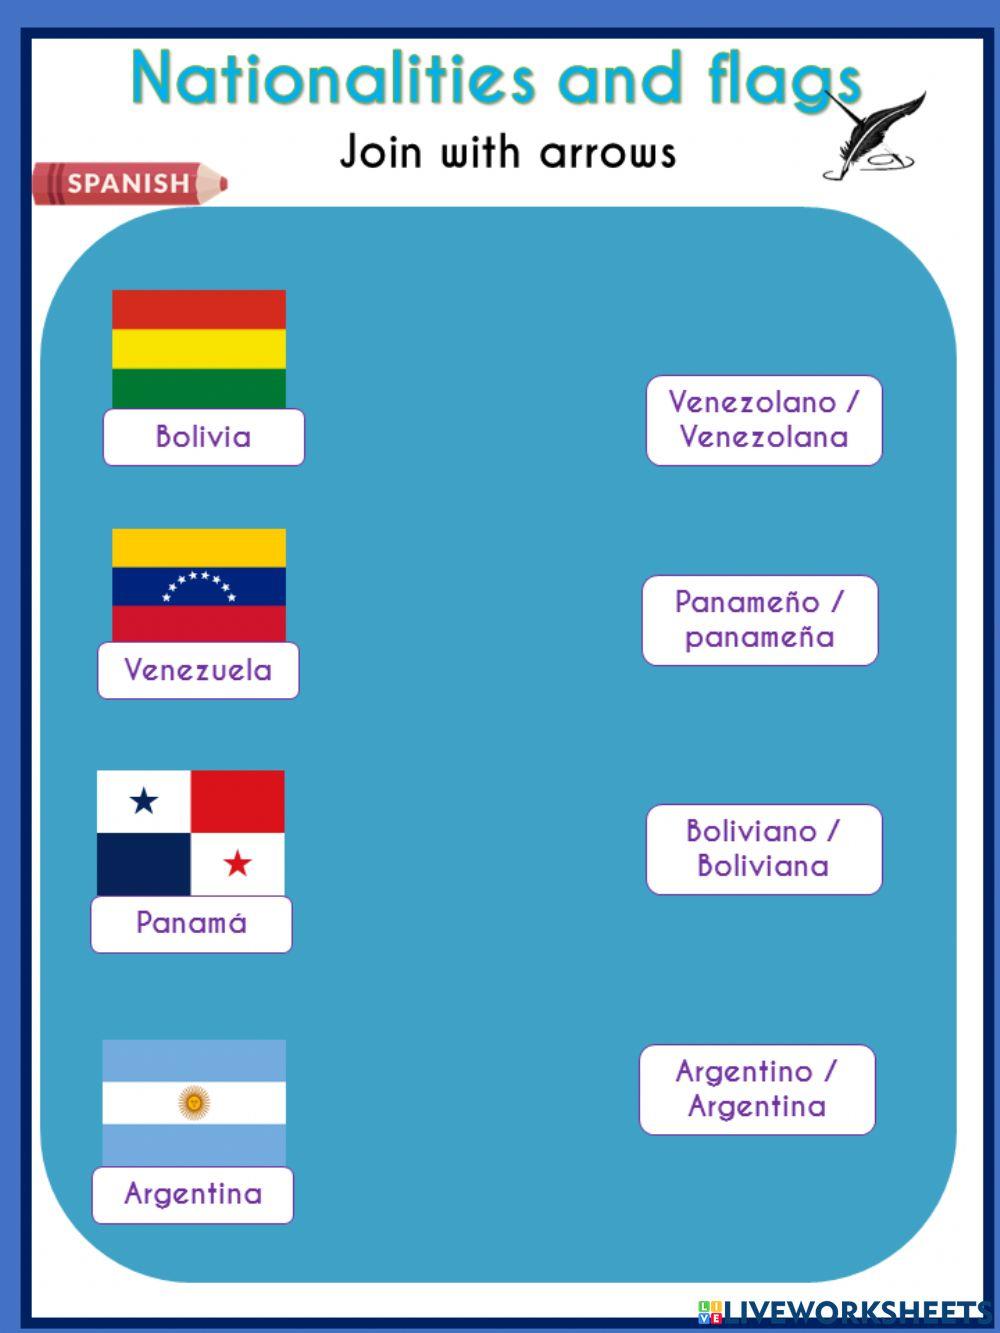 Nationalities and flags